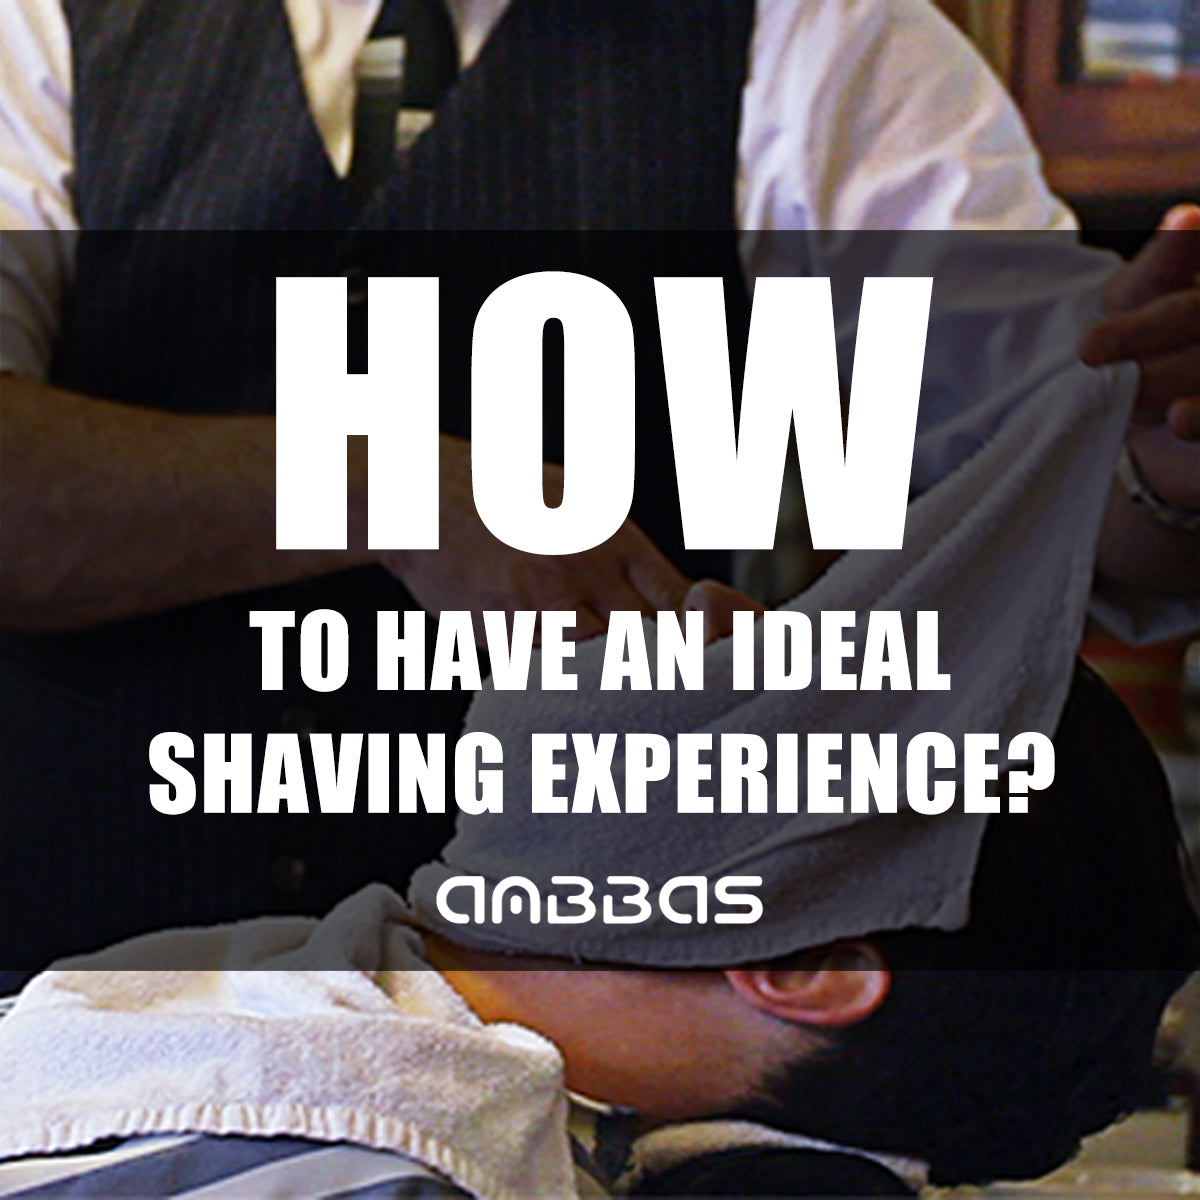 10 Tips on Shaving from The Professional, ANBBAS